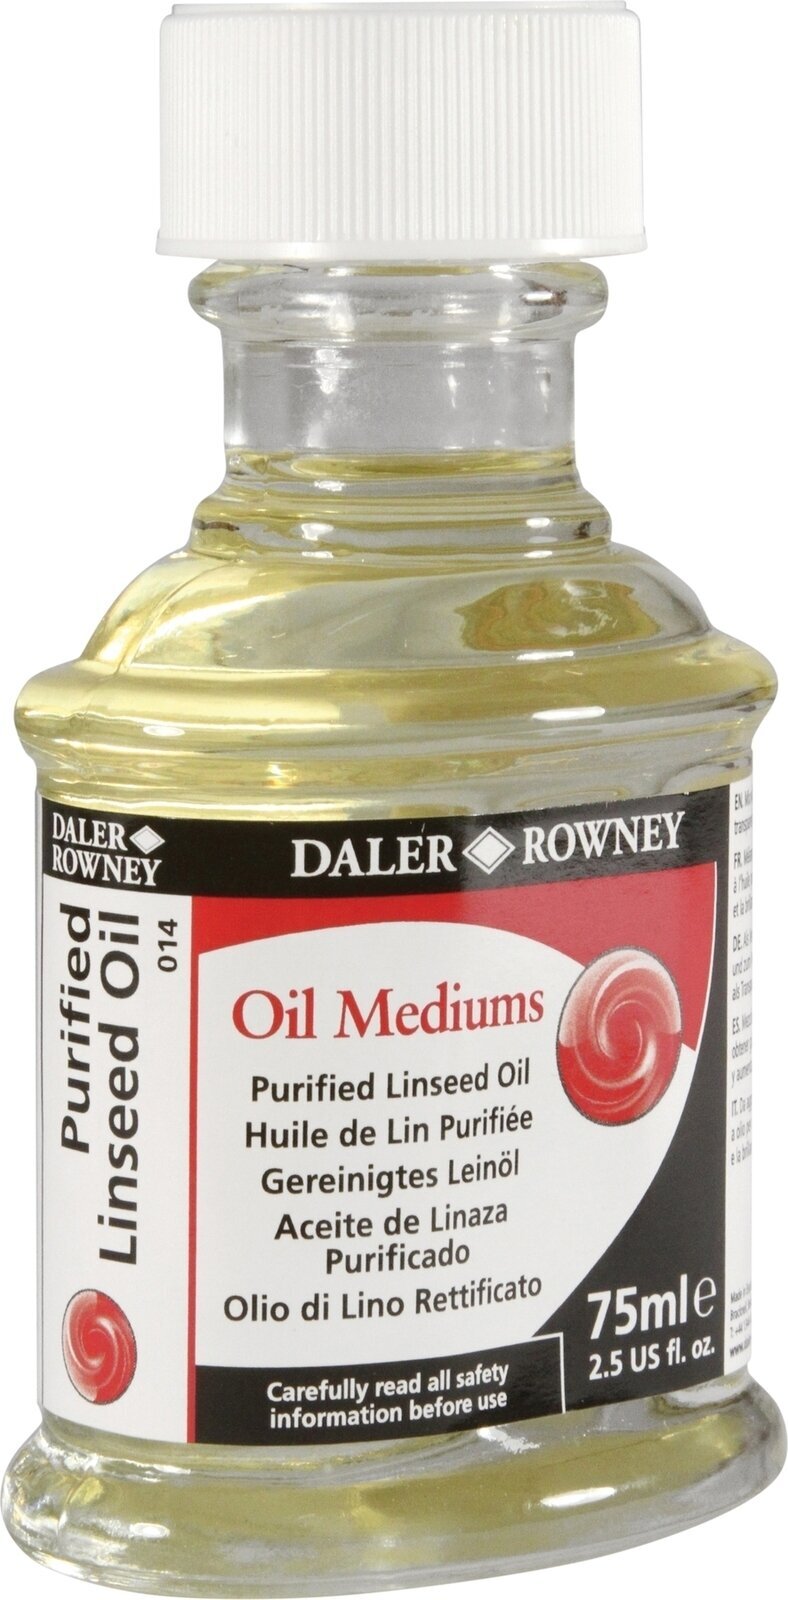 Medio Daler Rowney Purified Linseed Oil 75 ml Medio